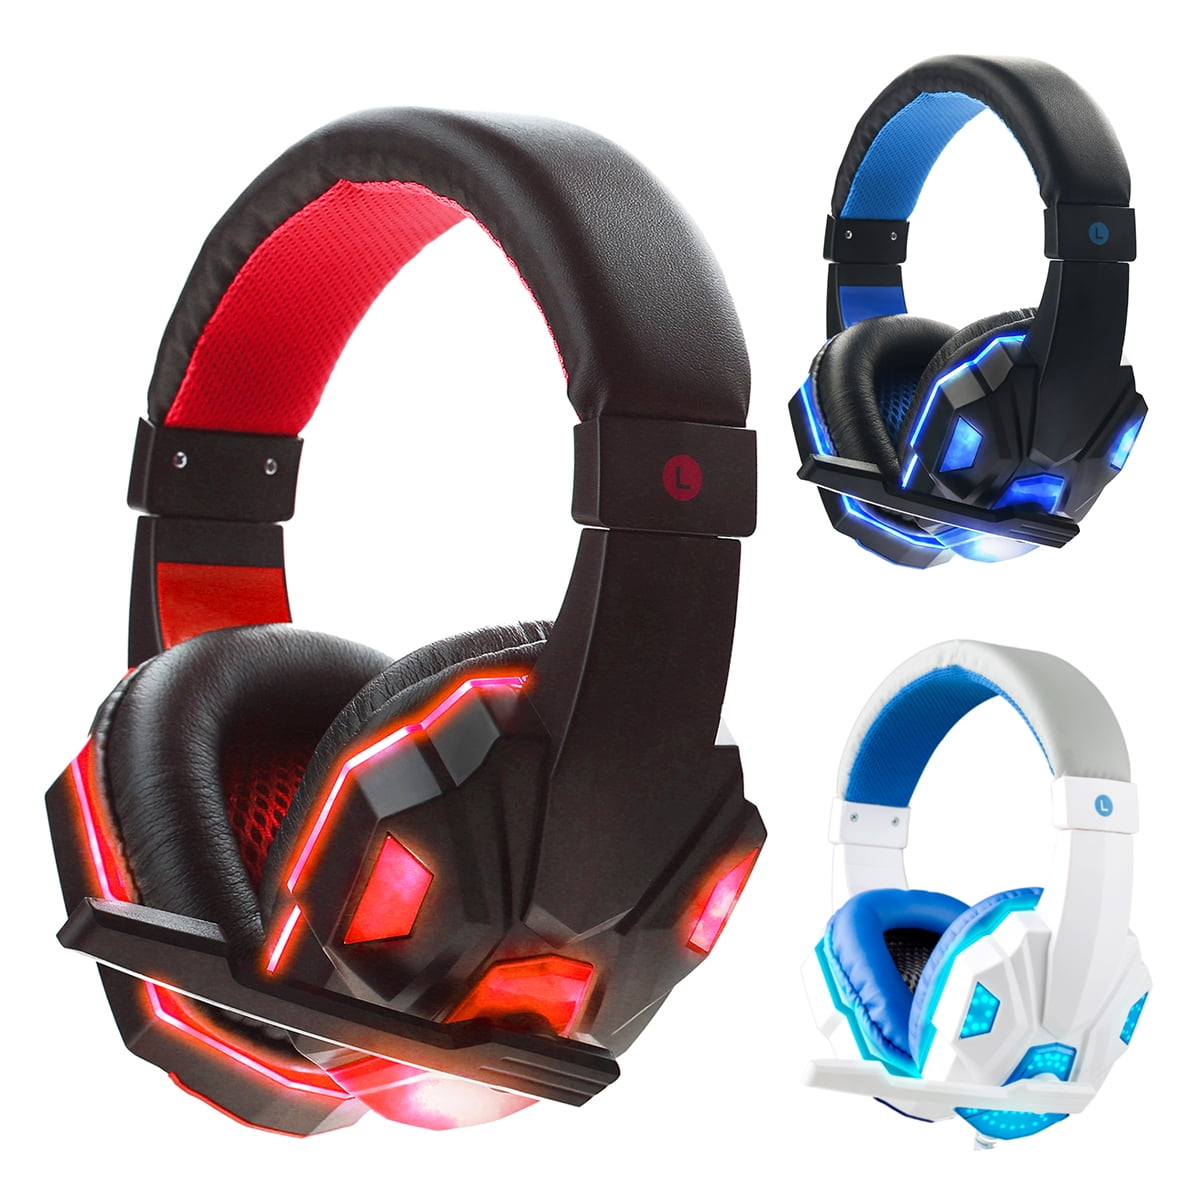 3.5mm Surround Stereo Gaming Headset Headband Headphone Noise-canceling For PC 